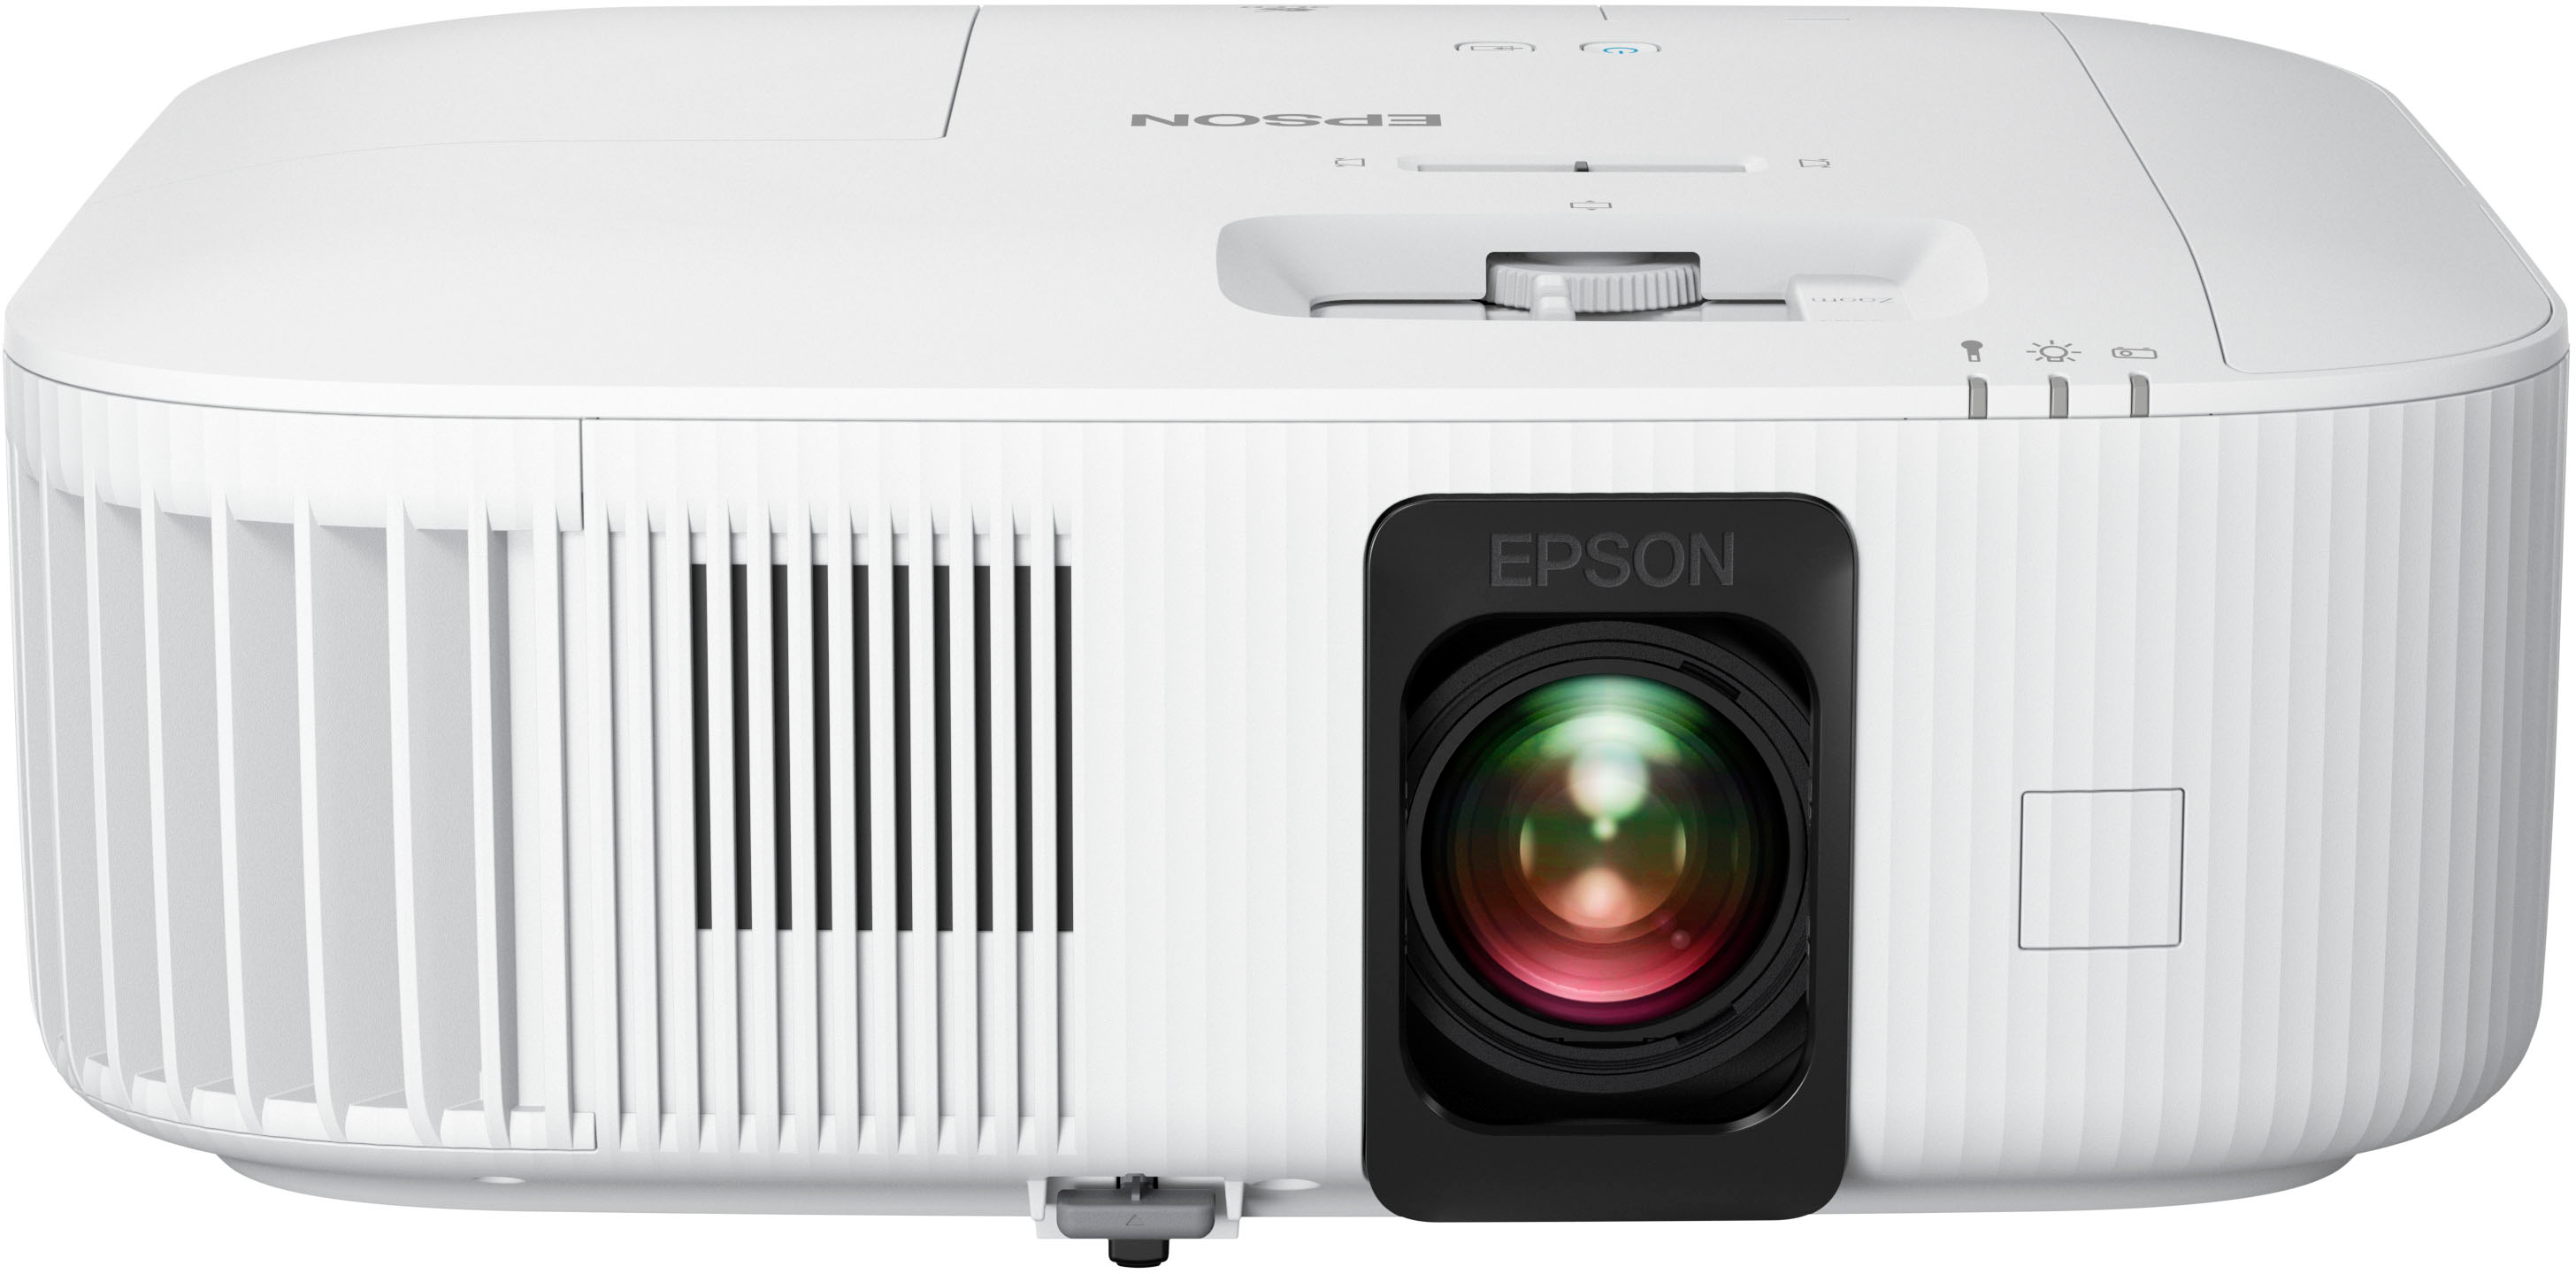 Are Projectors Good for Gaming?